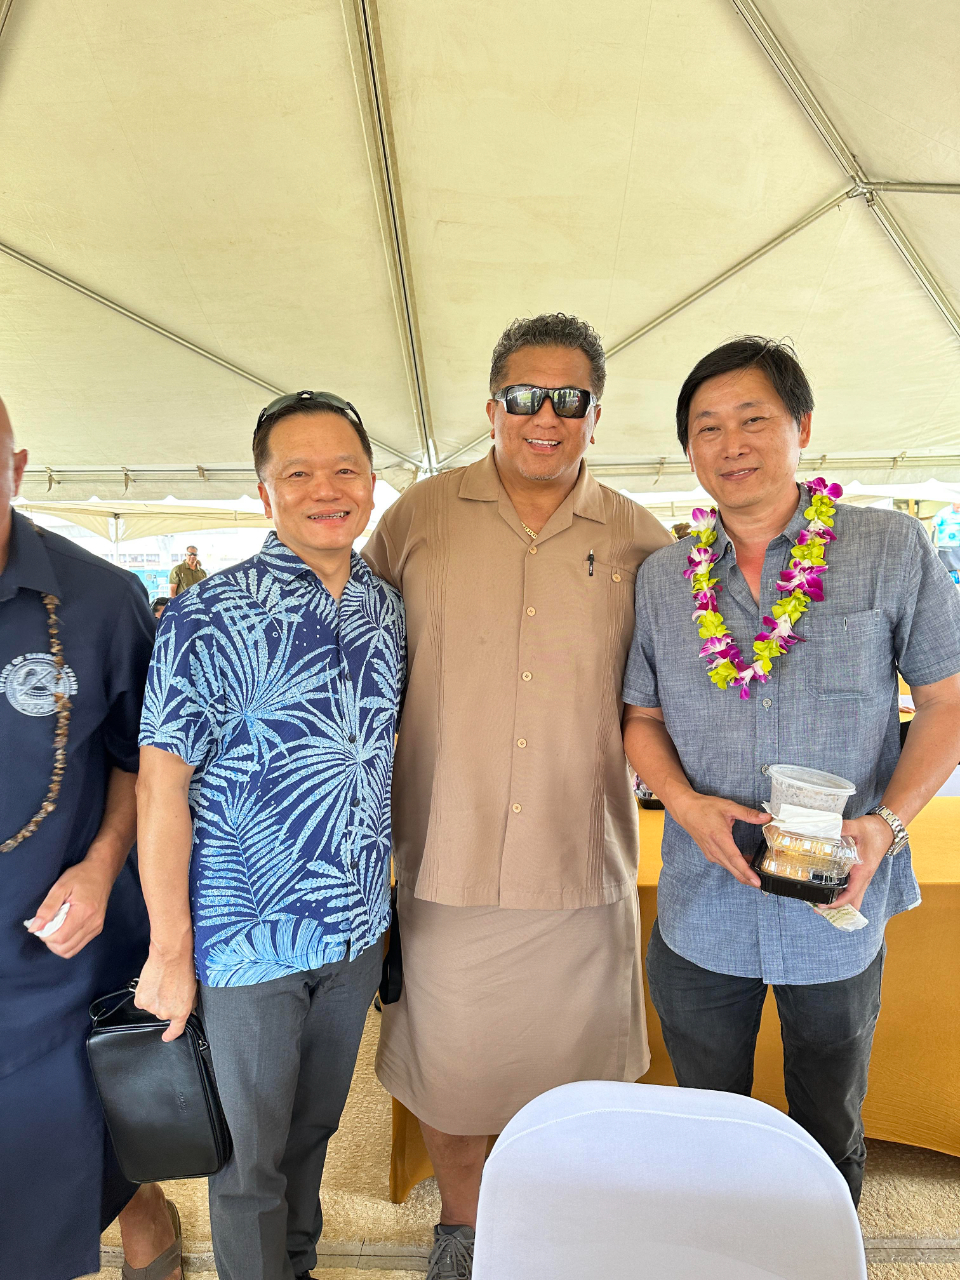 Director General Richard Lin is invited to the opening ceremony of Samoa Heritage Week and has a group photo with the Direcor Tuiafono Vaiuli Sua Jr. of American Samoa Governor’s Office- Hawaii and American Samoa Taiwanese business leader Sam Lin on July 29, 2023.